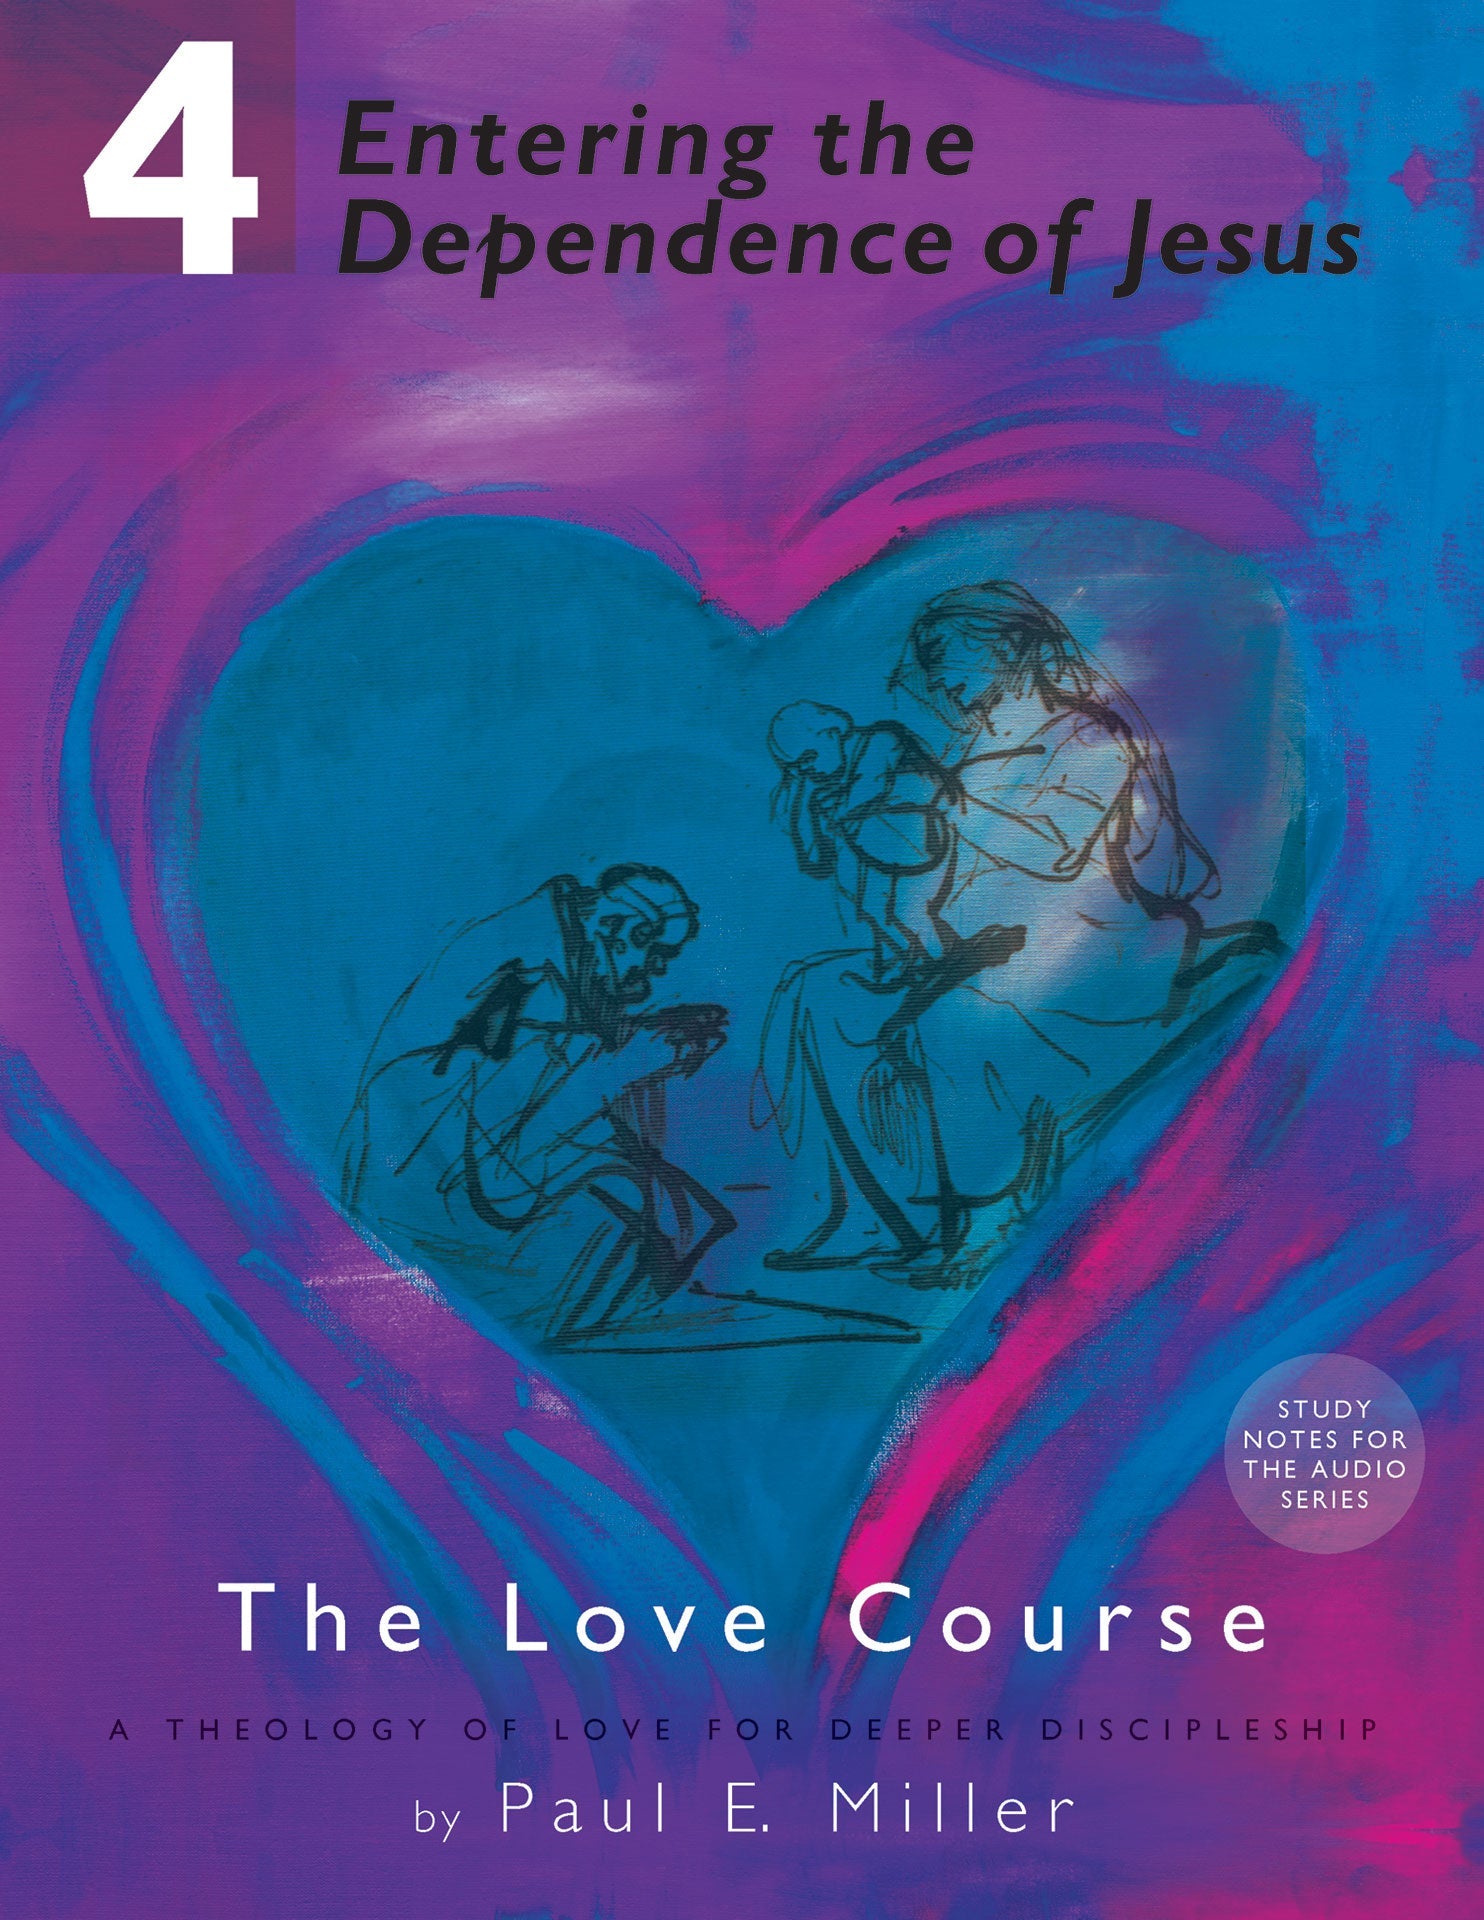 The Love Course, Unit 4: Entering the Dependence of Jesus Manual